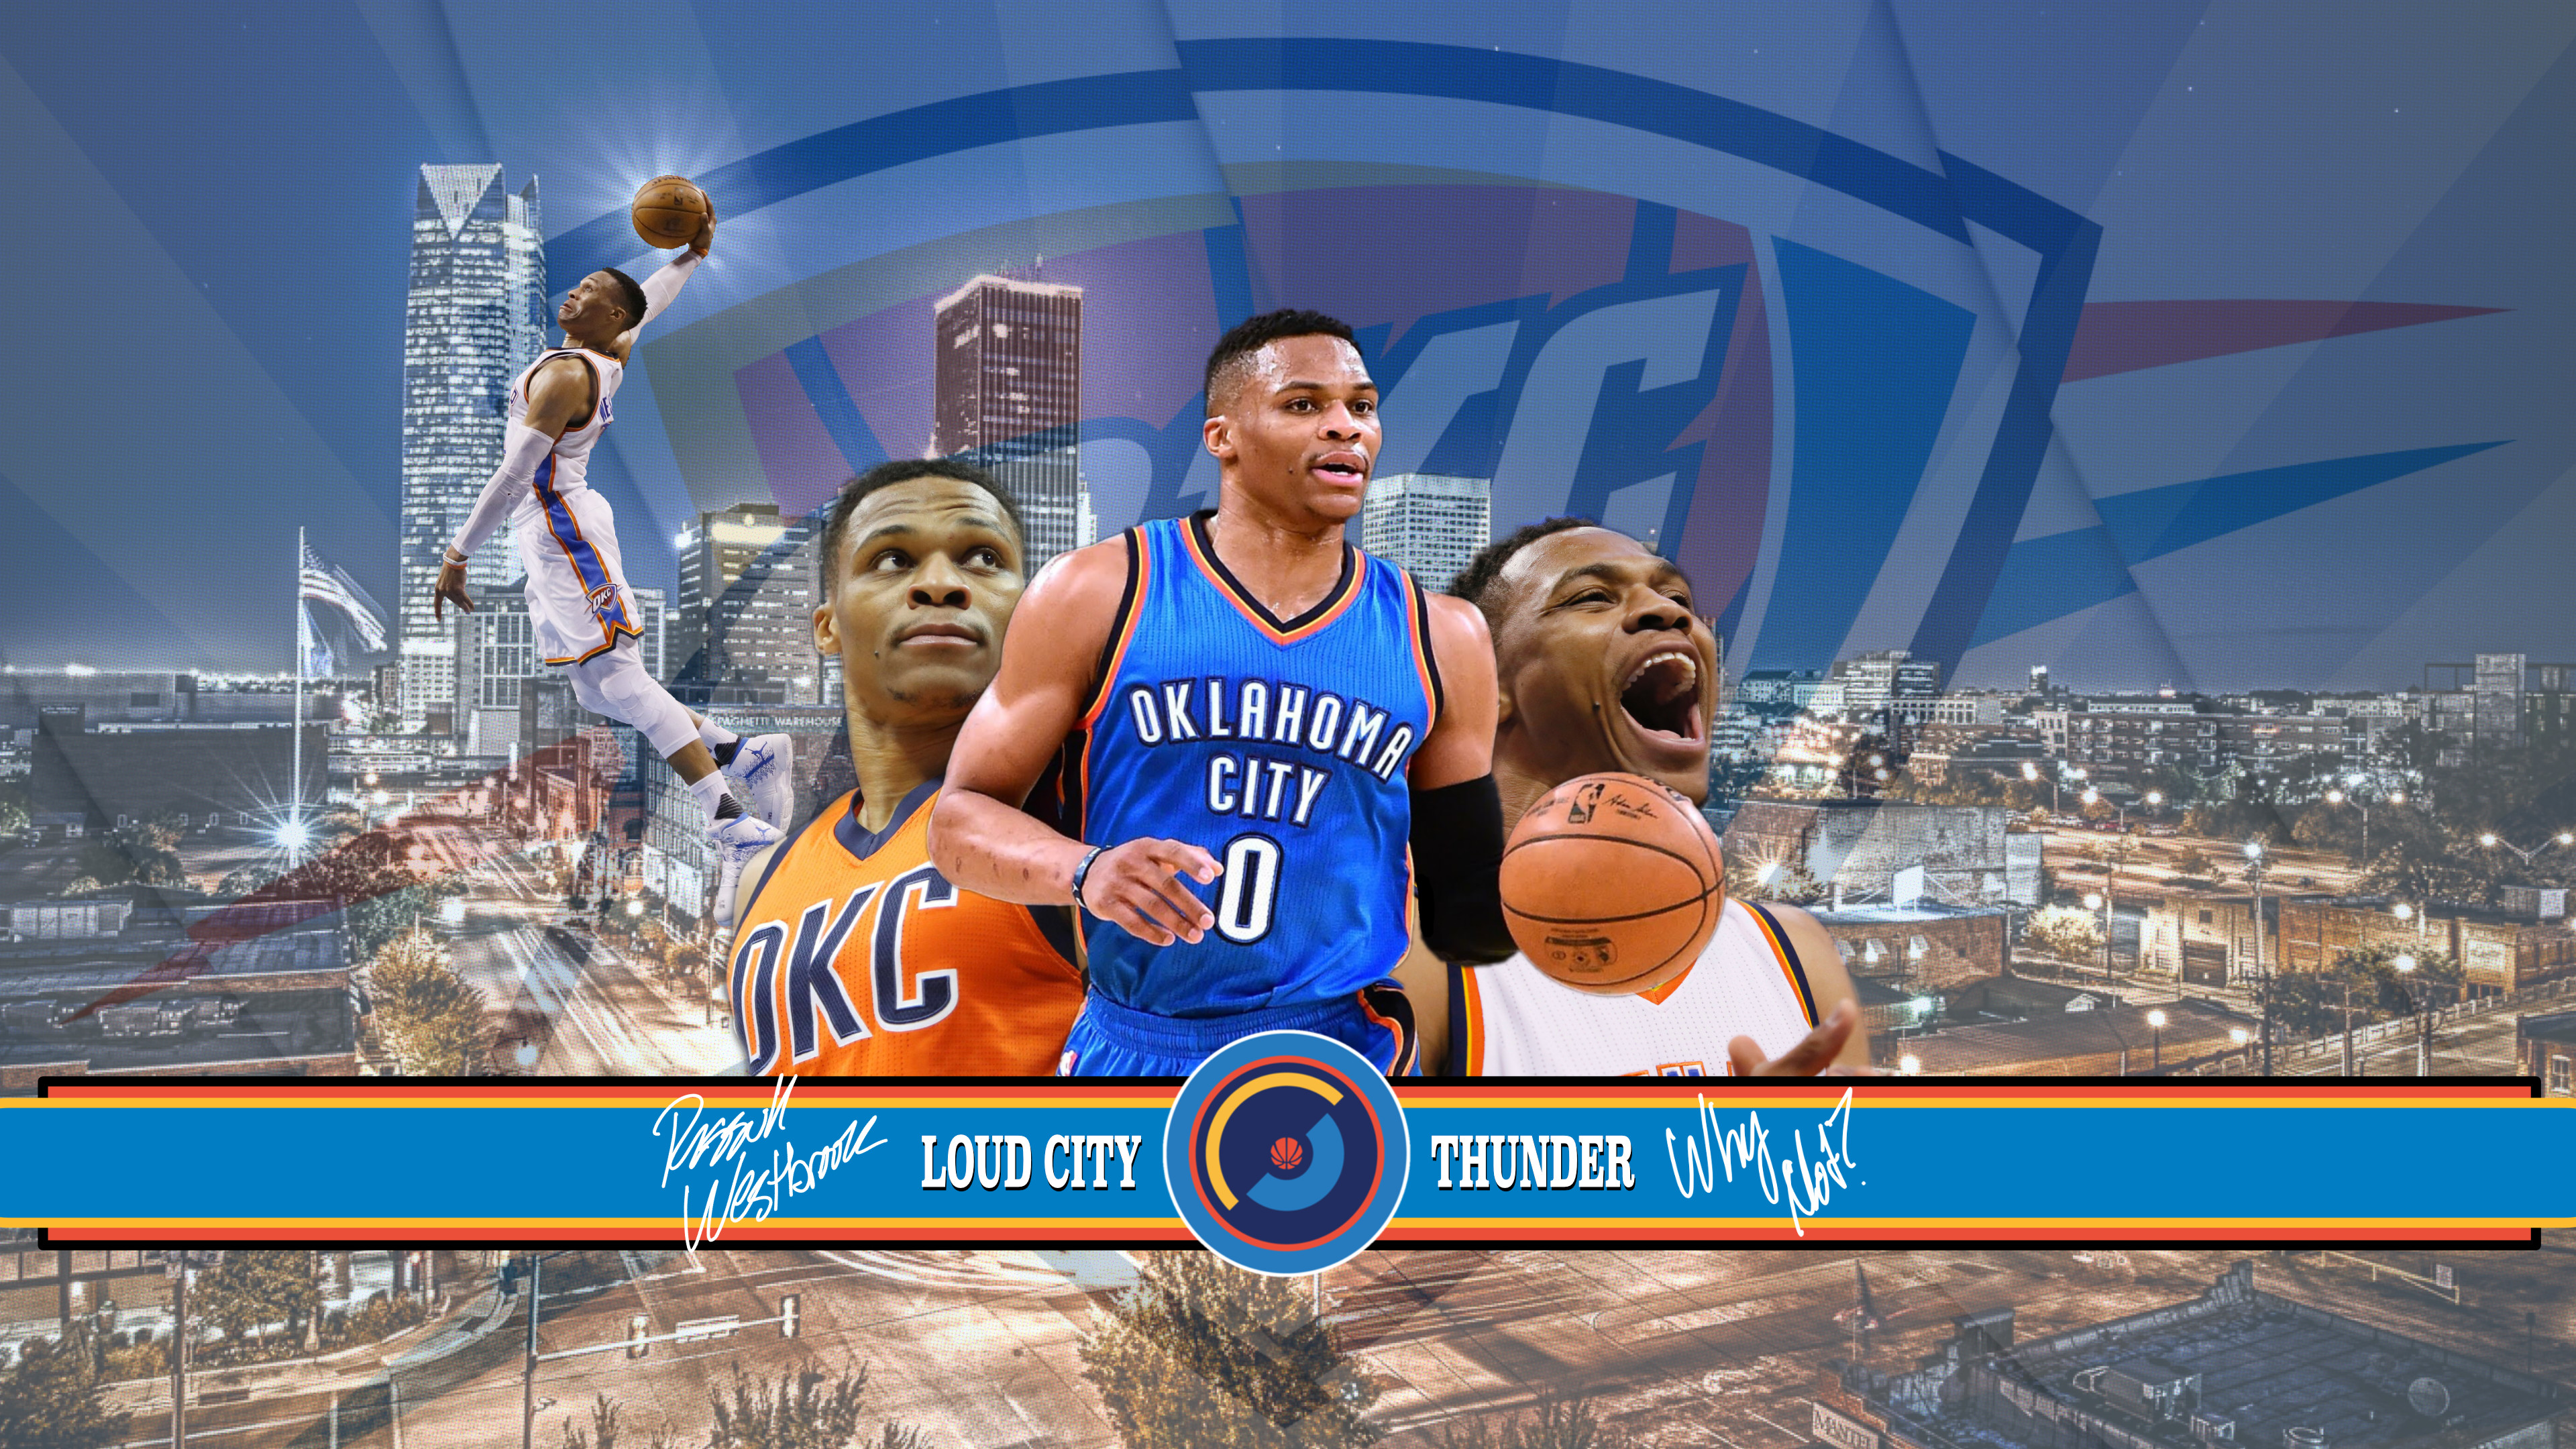 3840x2160 Russell Westbrook: Why Not? PC/Mac Wallpaper